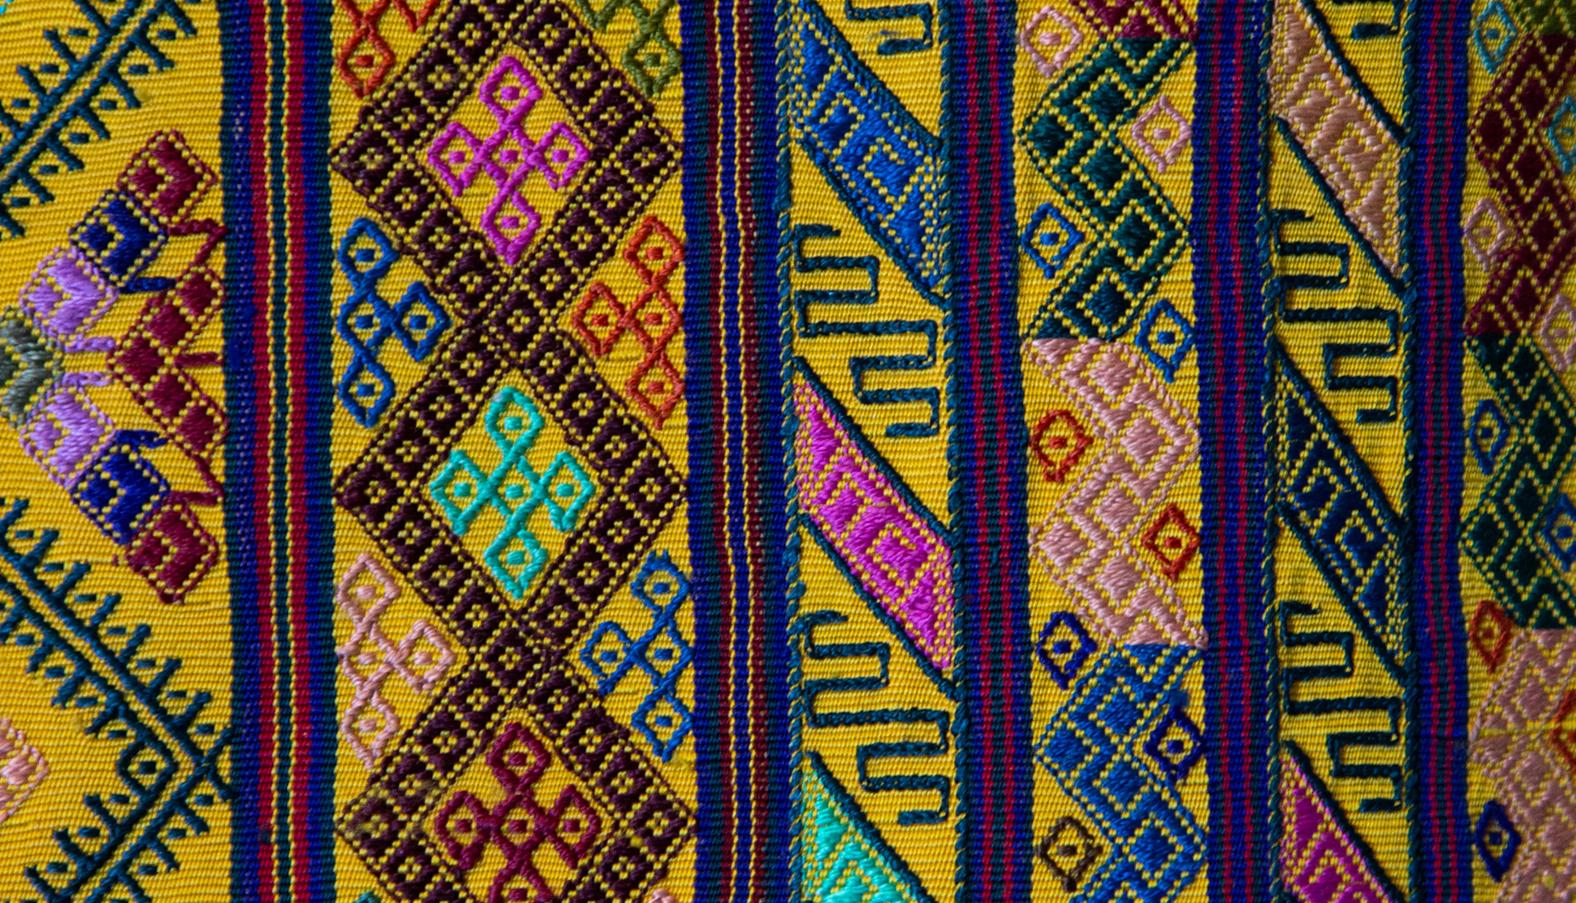 Bhutanese silk woven Kira textile, purple. From the Royal weavers of Bhutan, this kira textile is a rectangular weaving worn as an ankle length dress by Bhutanese women. This example was originally woven for Her Majesty Gyalyum (Queen Mother) Sangay